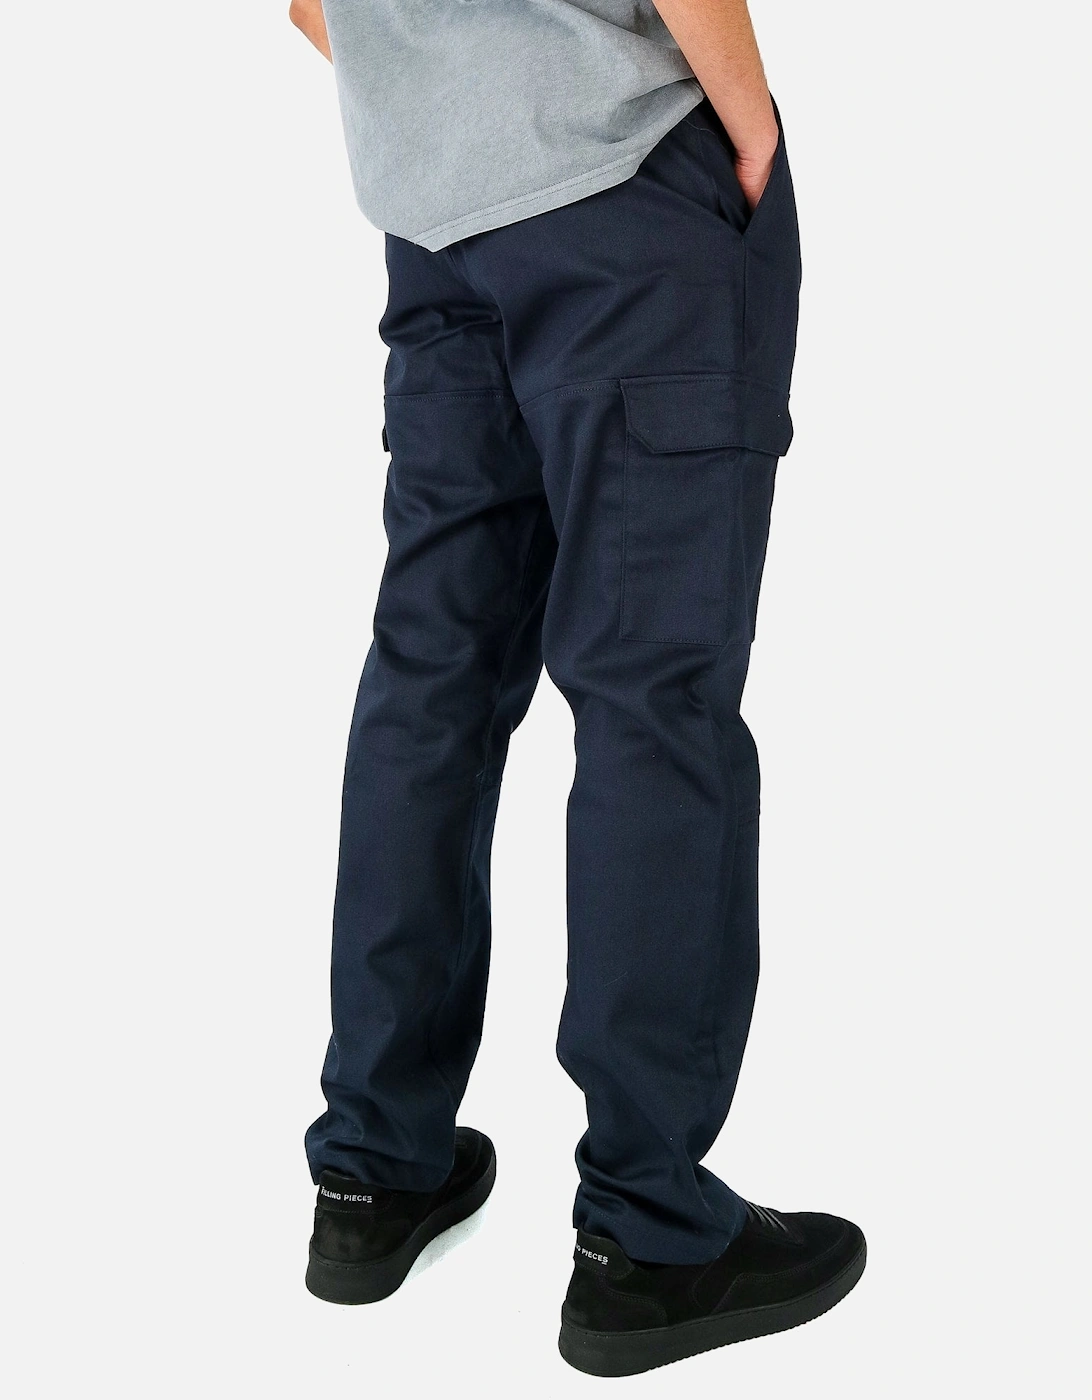 Ecargo Pocketed Navy Pant